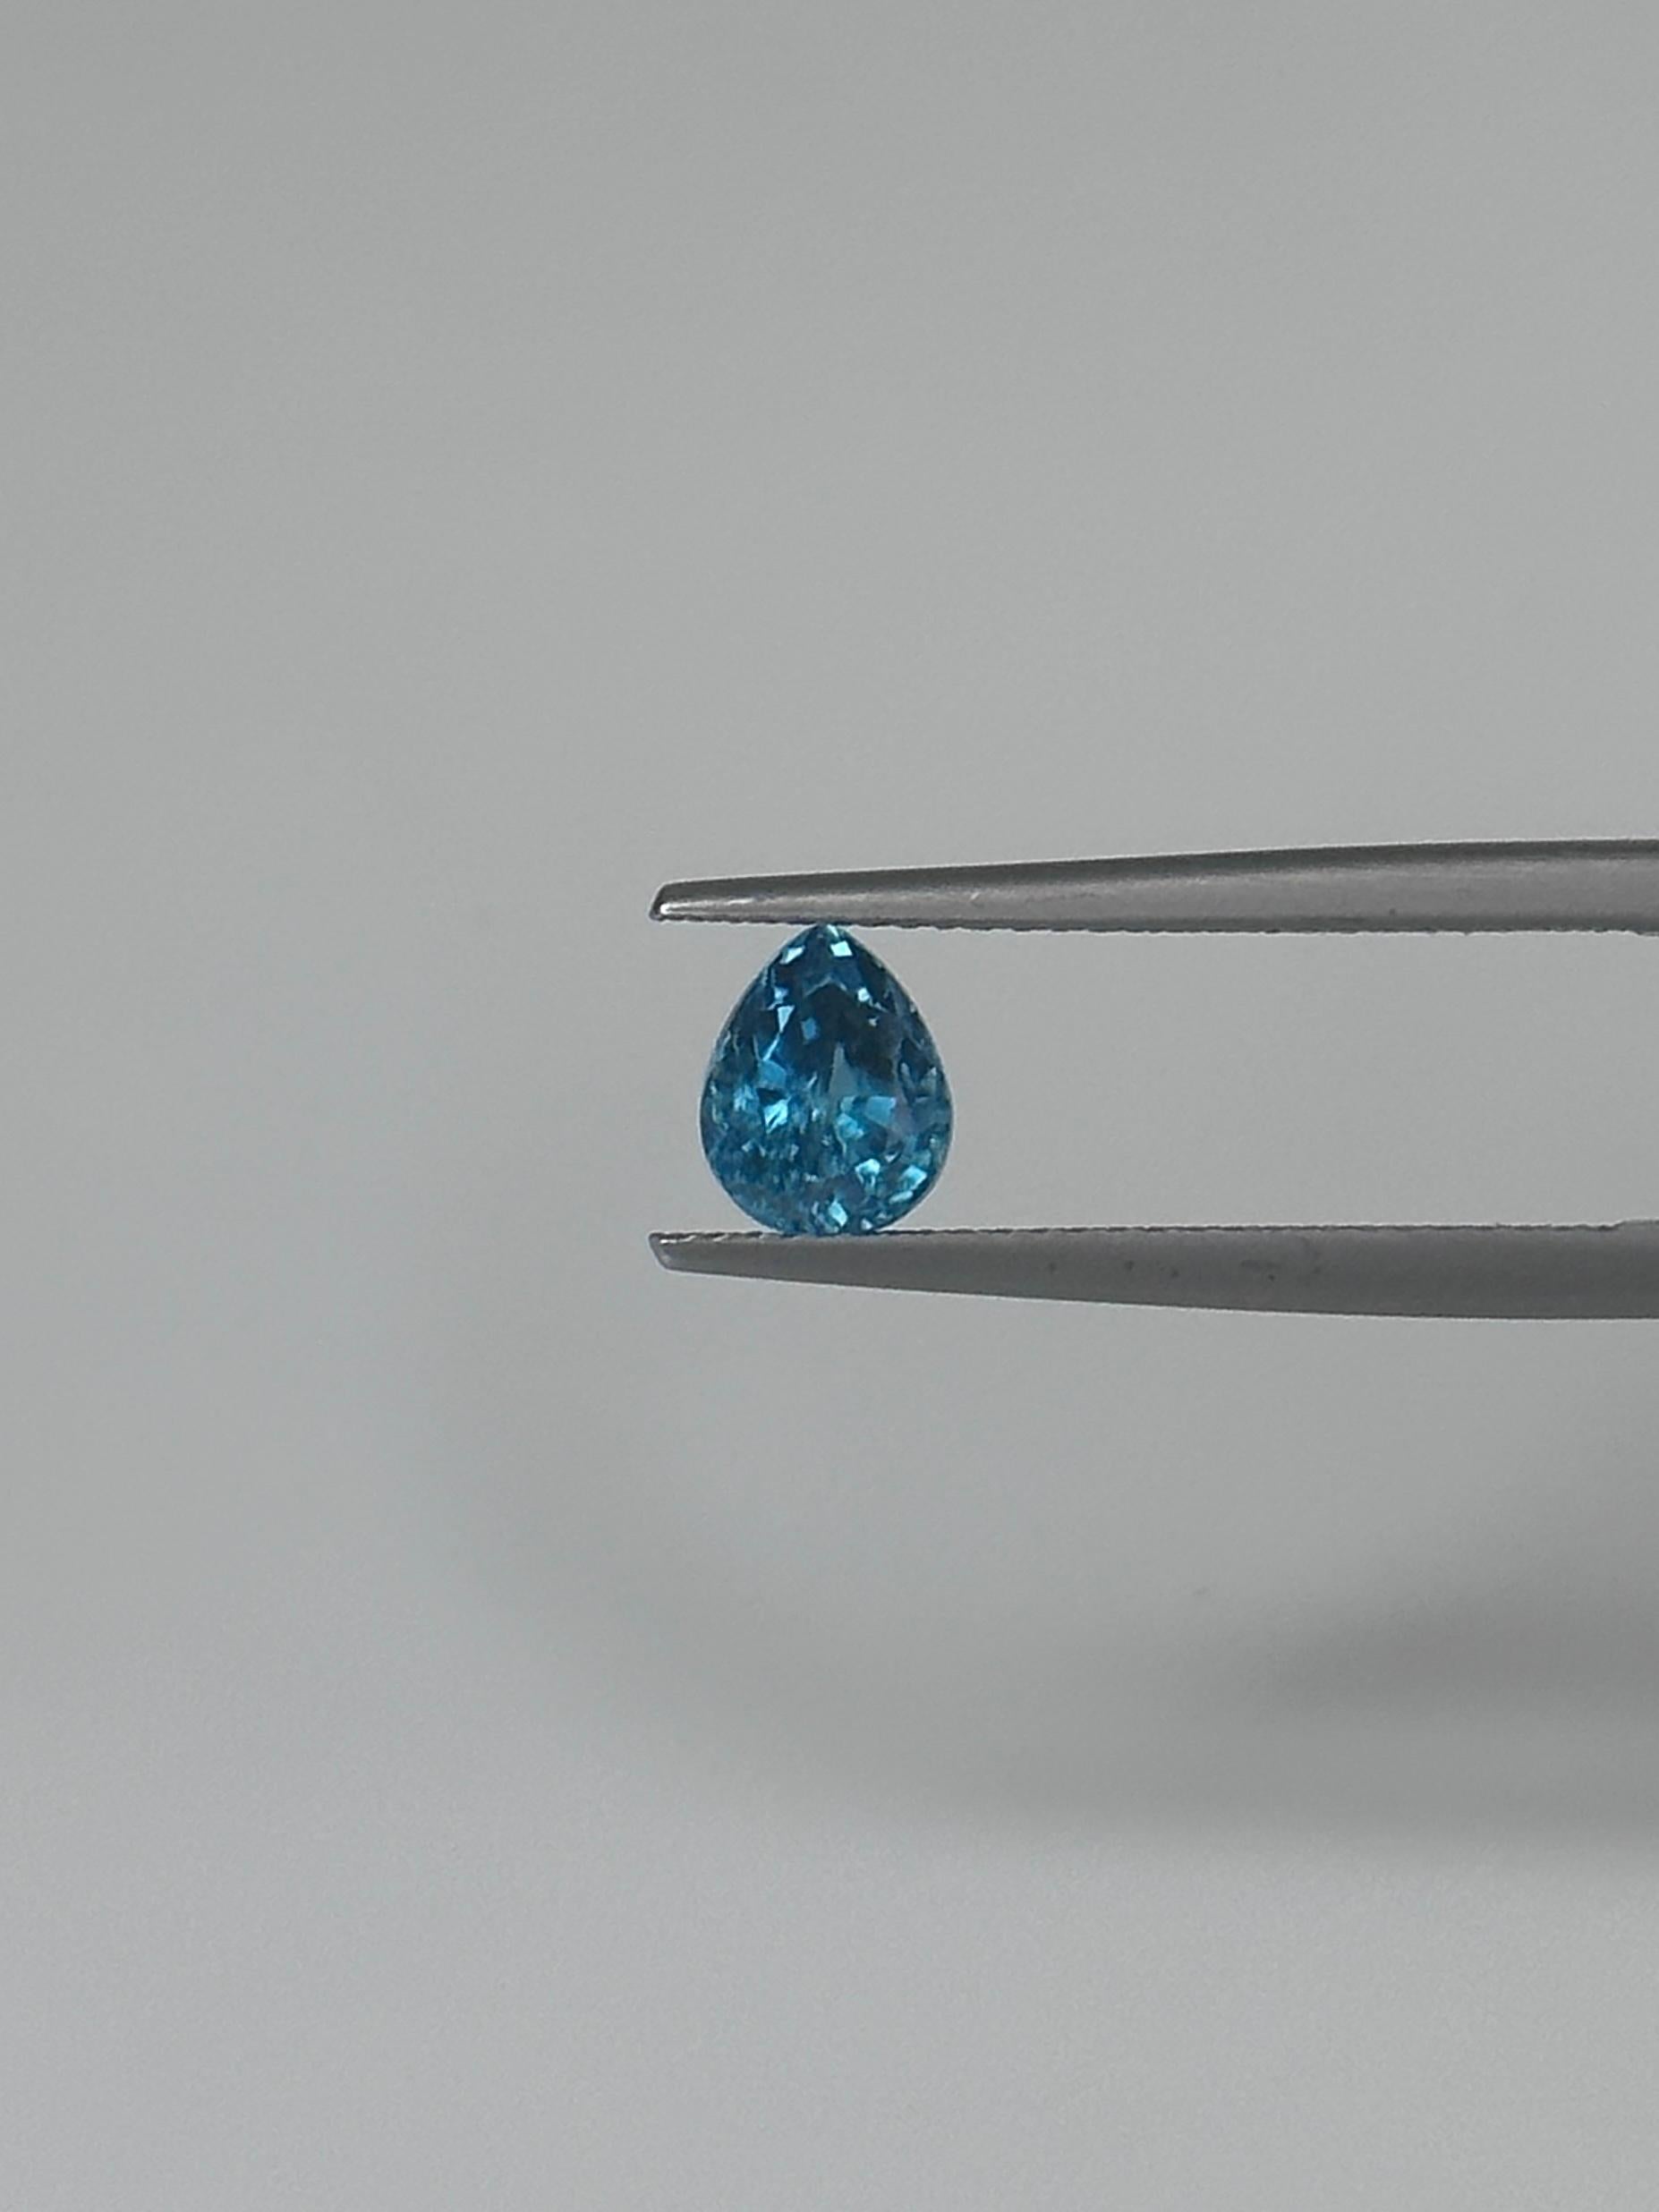 Sparkling Pear-cut Sky Blue Zircon

This 1.56 carat Blue Zircon has an impressive fire and a pure light blue color. Giving it the 